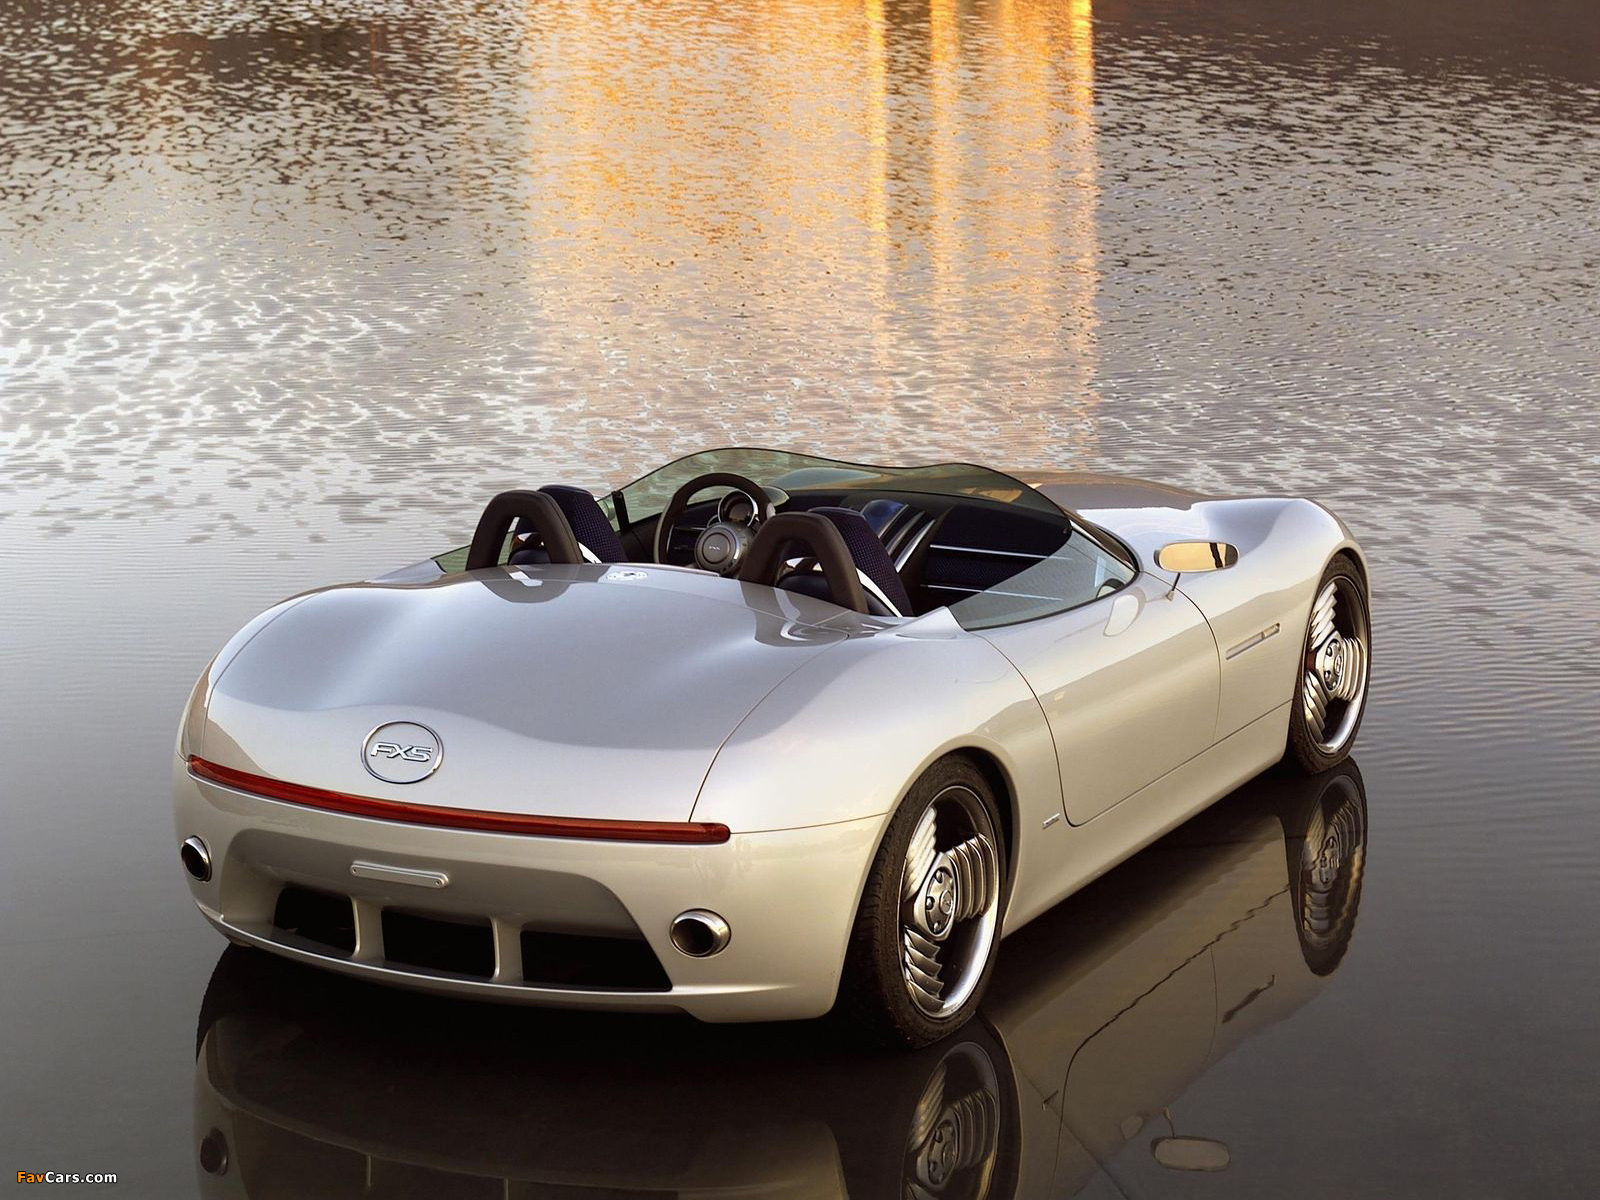 Images of Toyota FXS Concept 2002 (1600 x 1200)